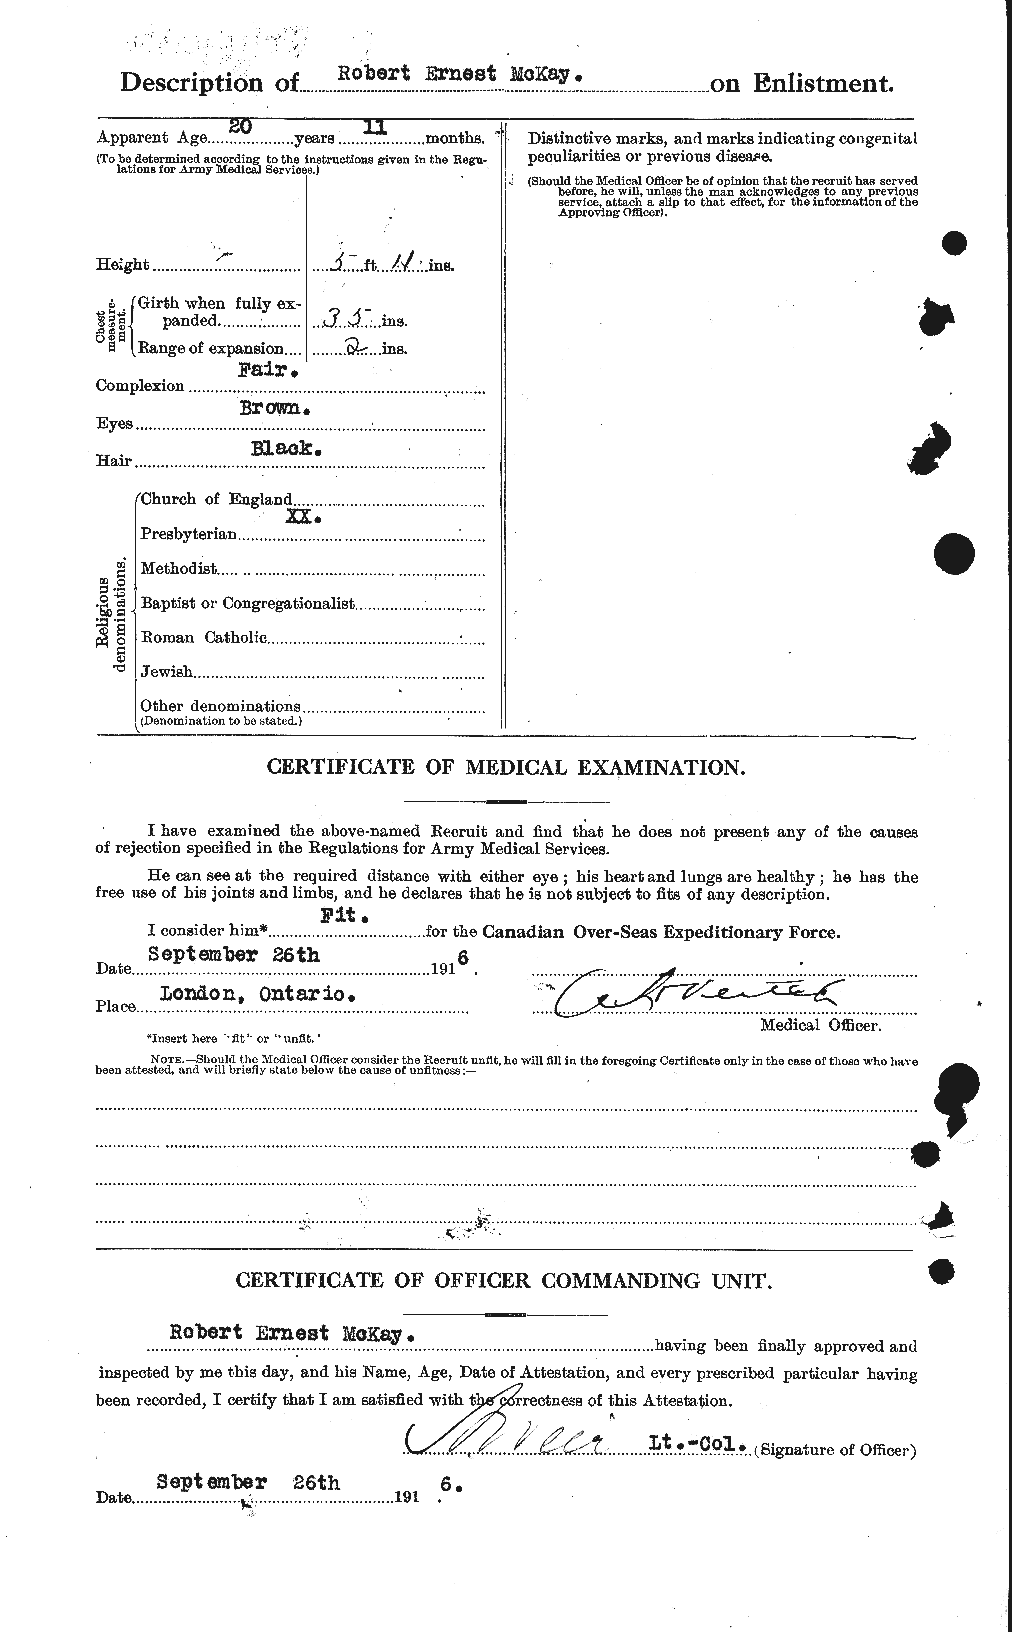 Personnel Records of the First World War - CEF 530094b